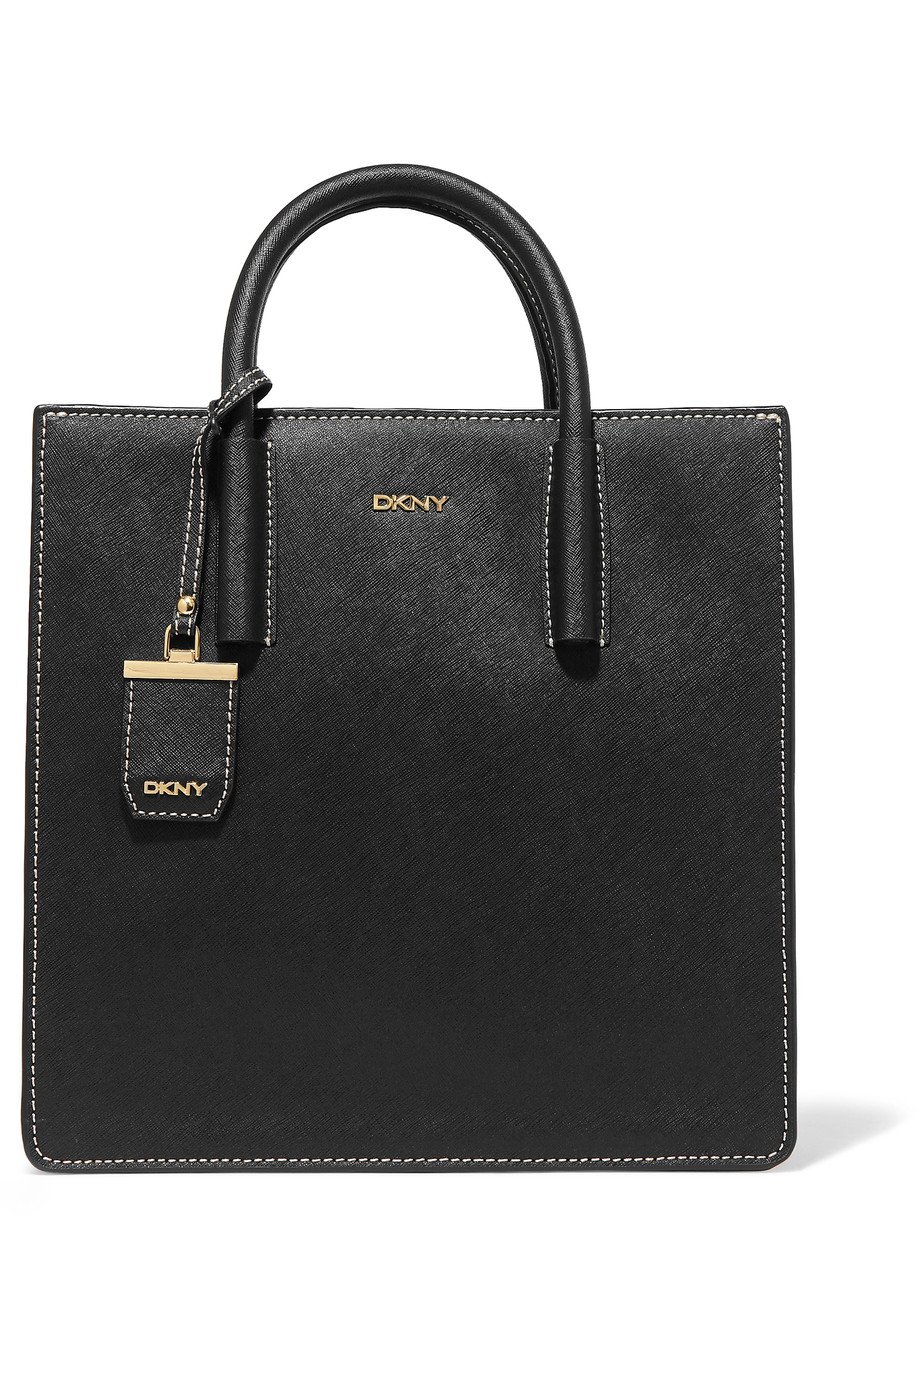 Dkny Textured-Leather Tote | ModeSens